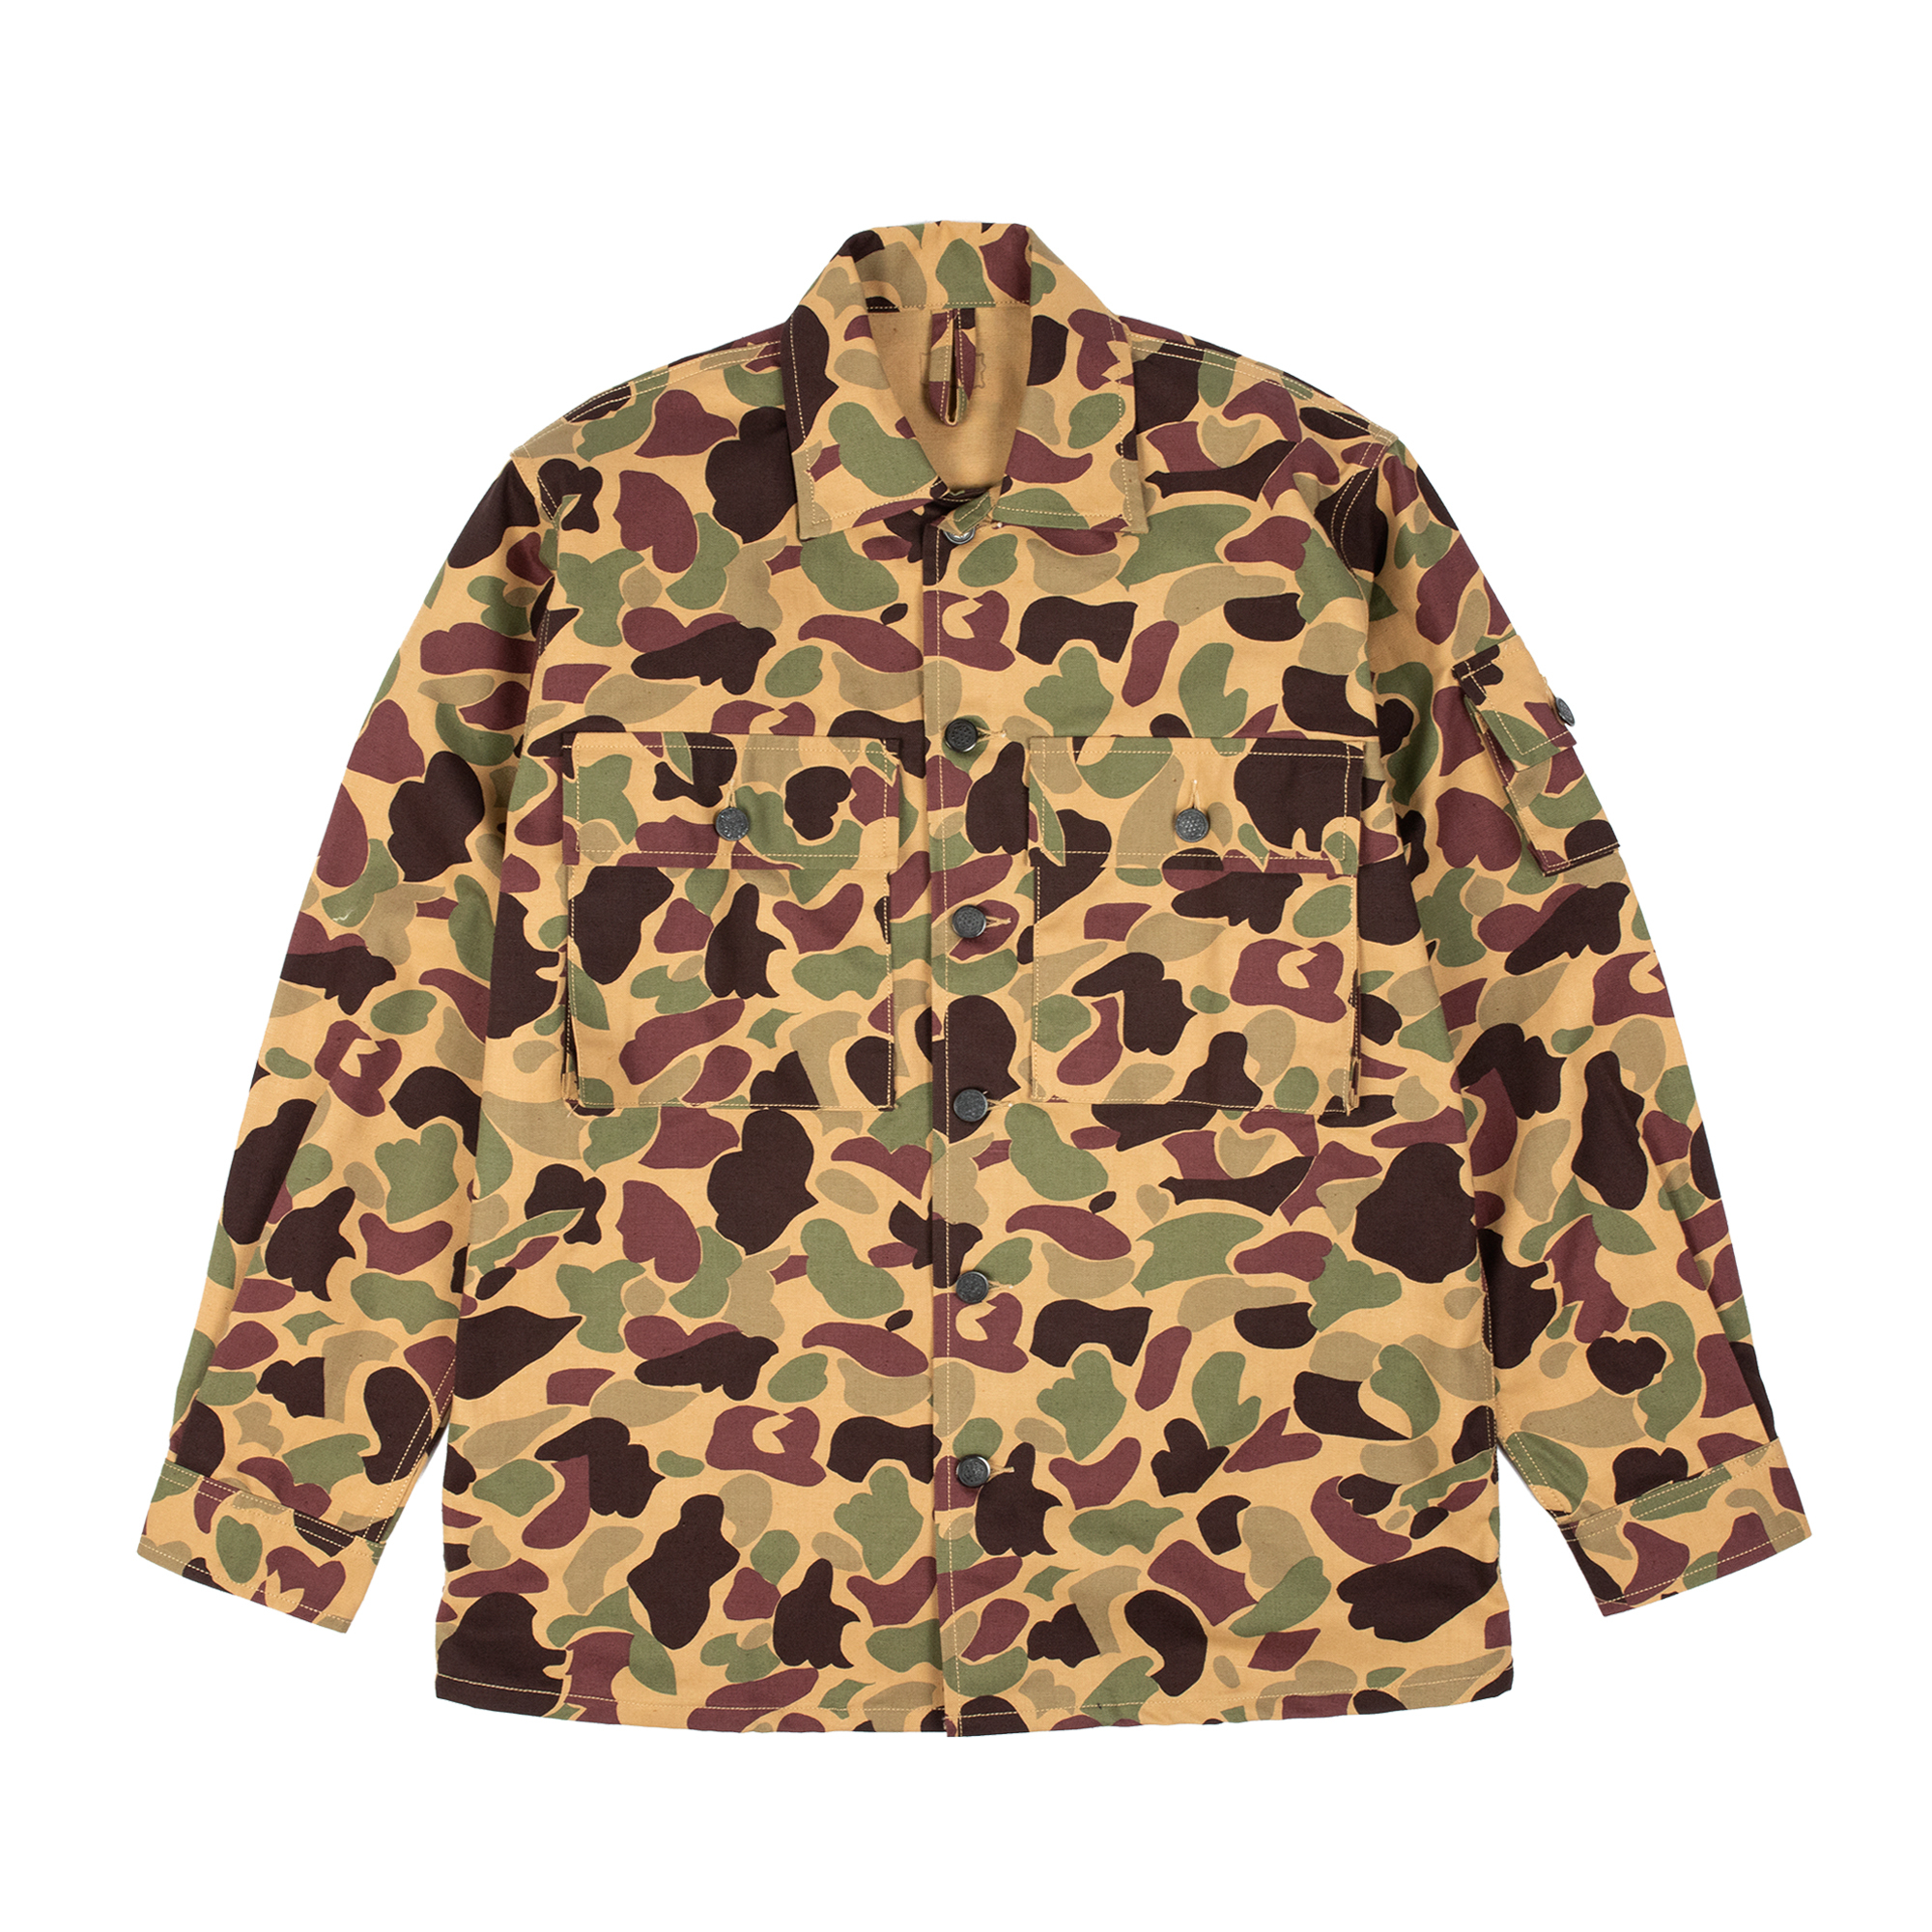 The Real McCoy's - Beo Gam Camouflage Shirt (Beige)